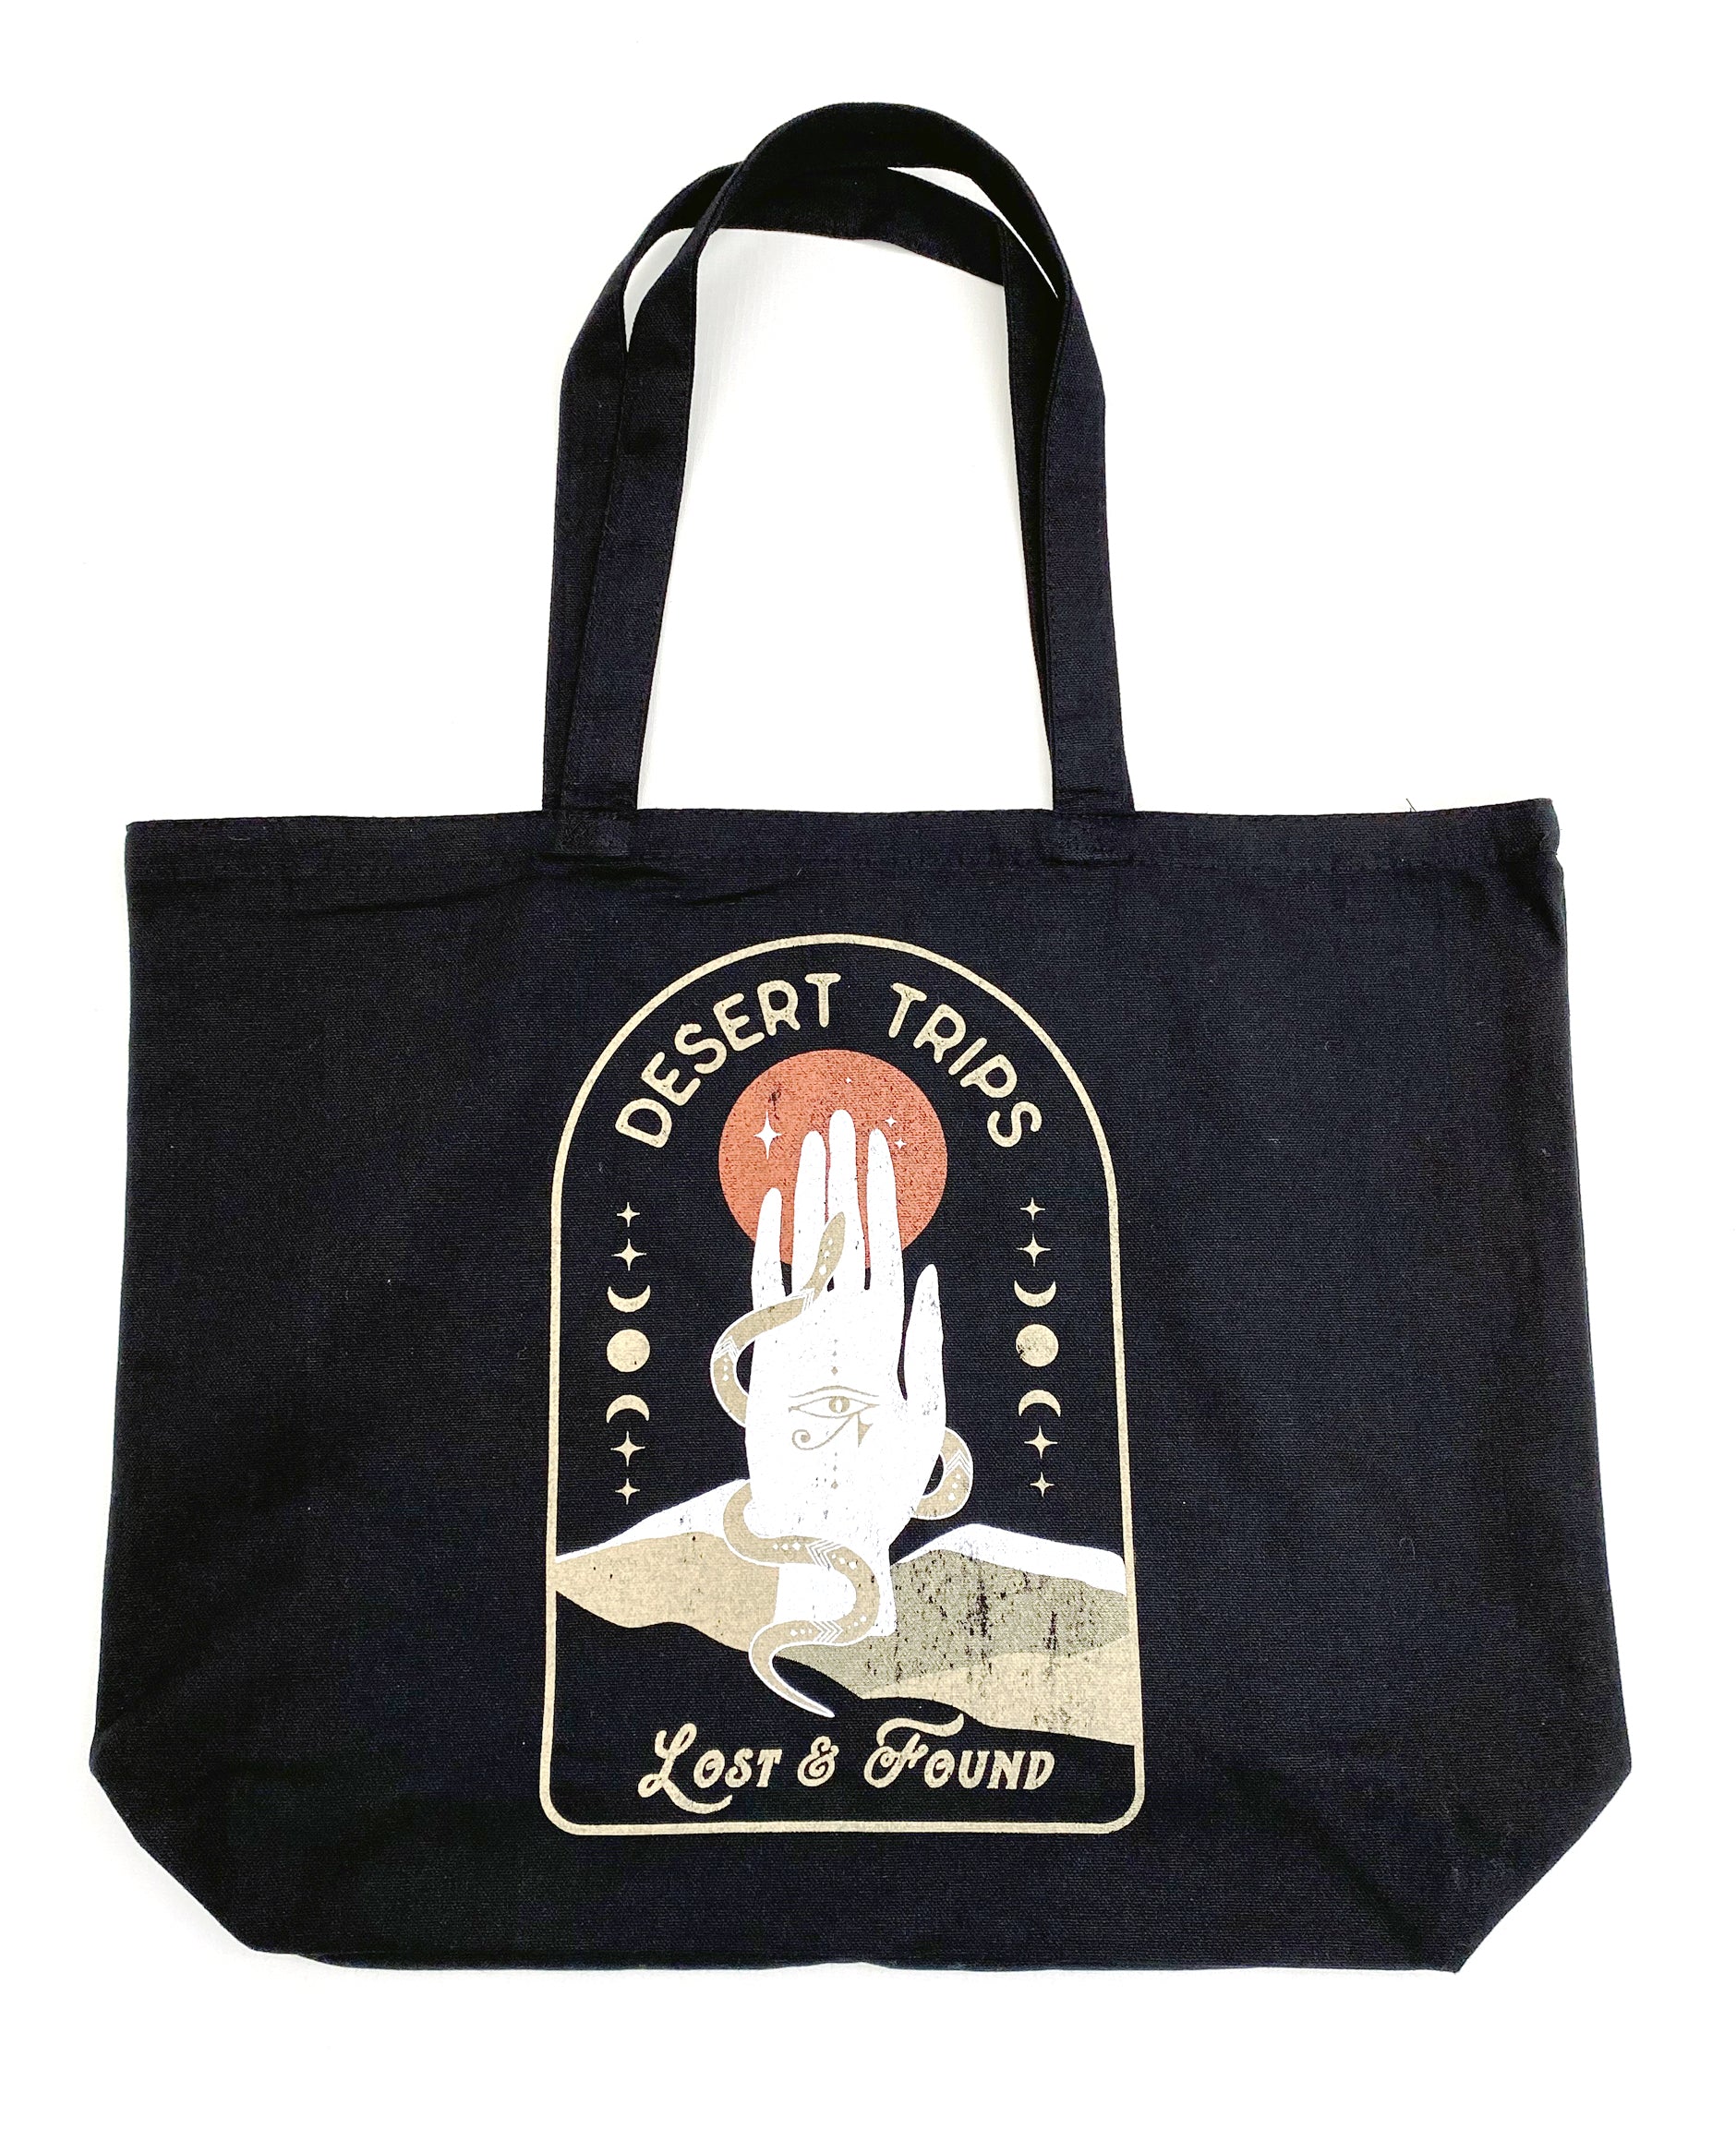 Three Tote Bags To Take You From Day To Night — CNK Daily (ChicksNKicks)